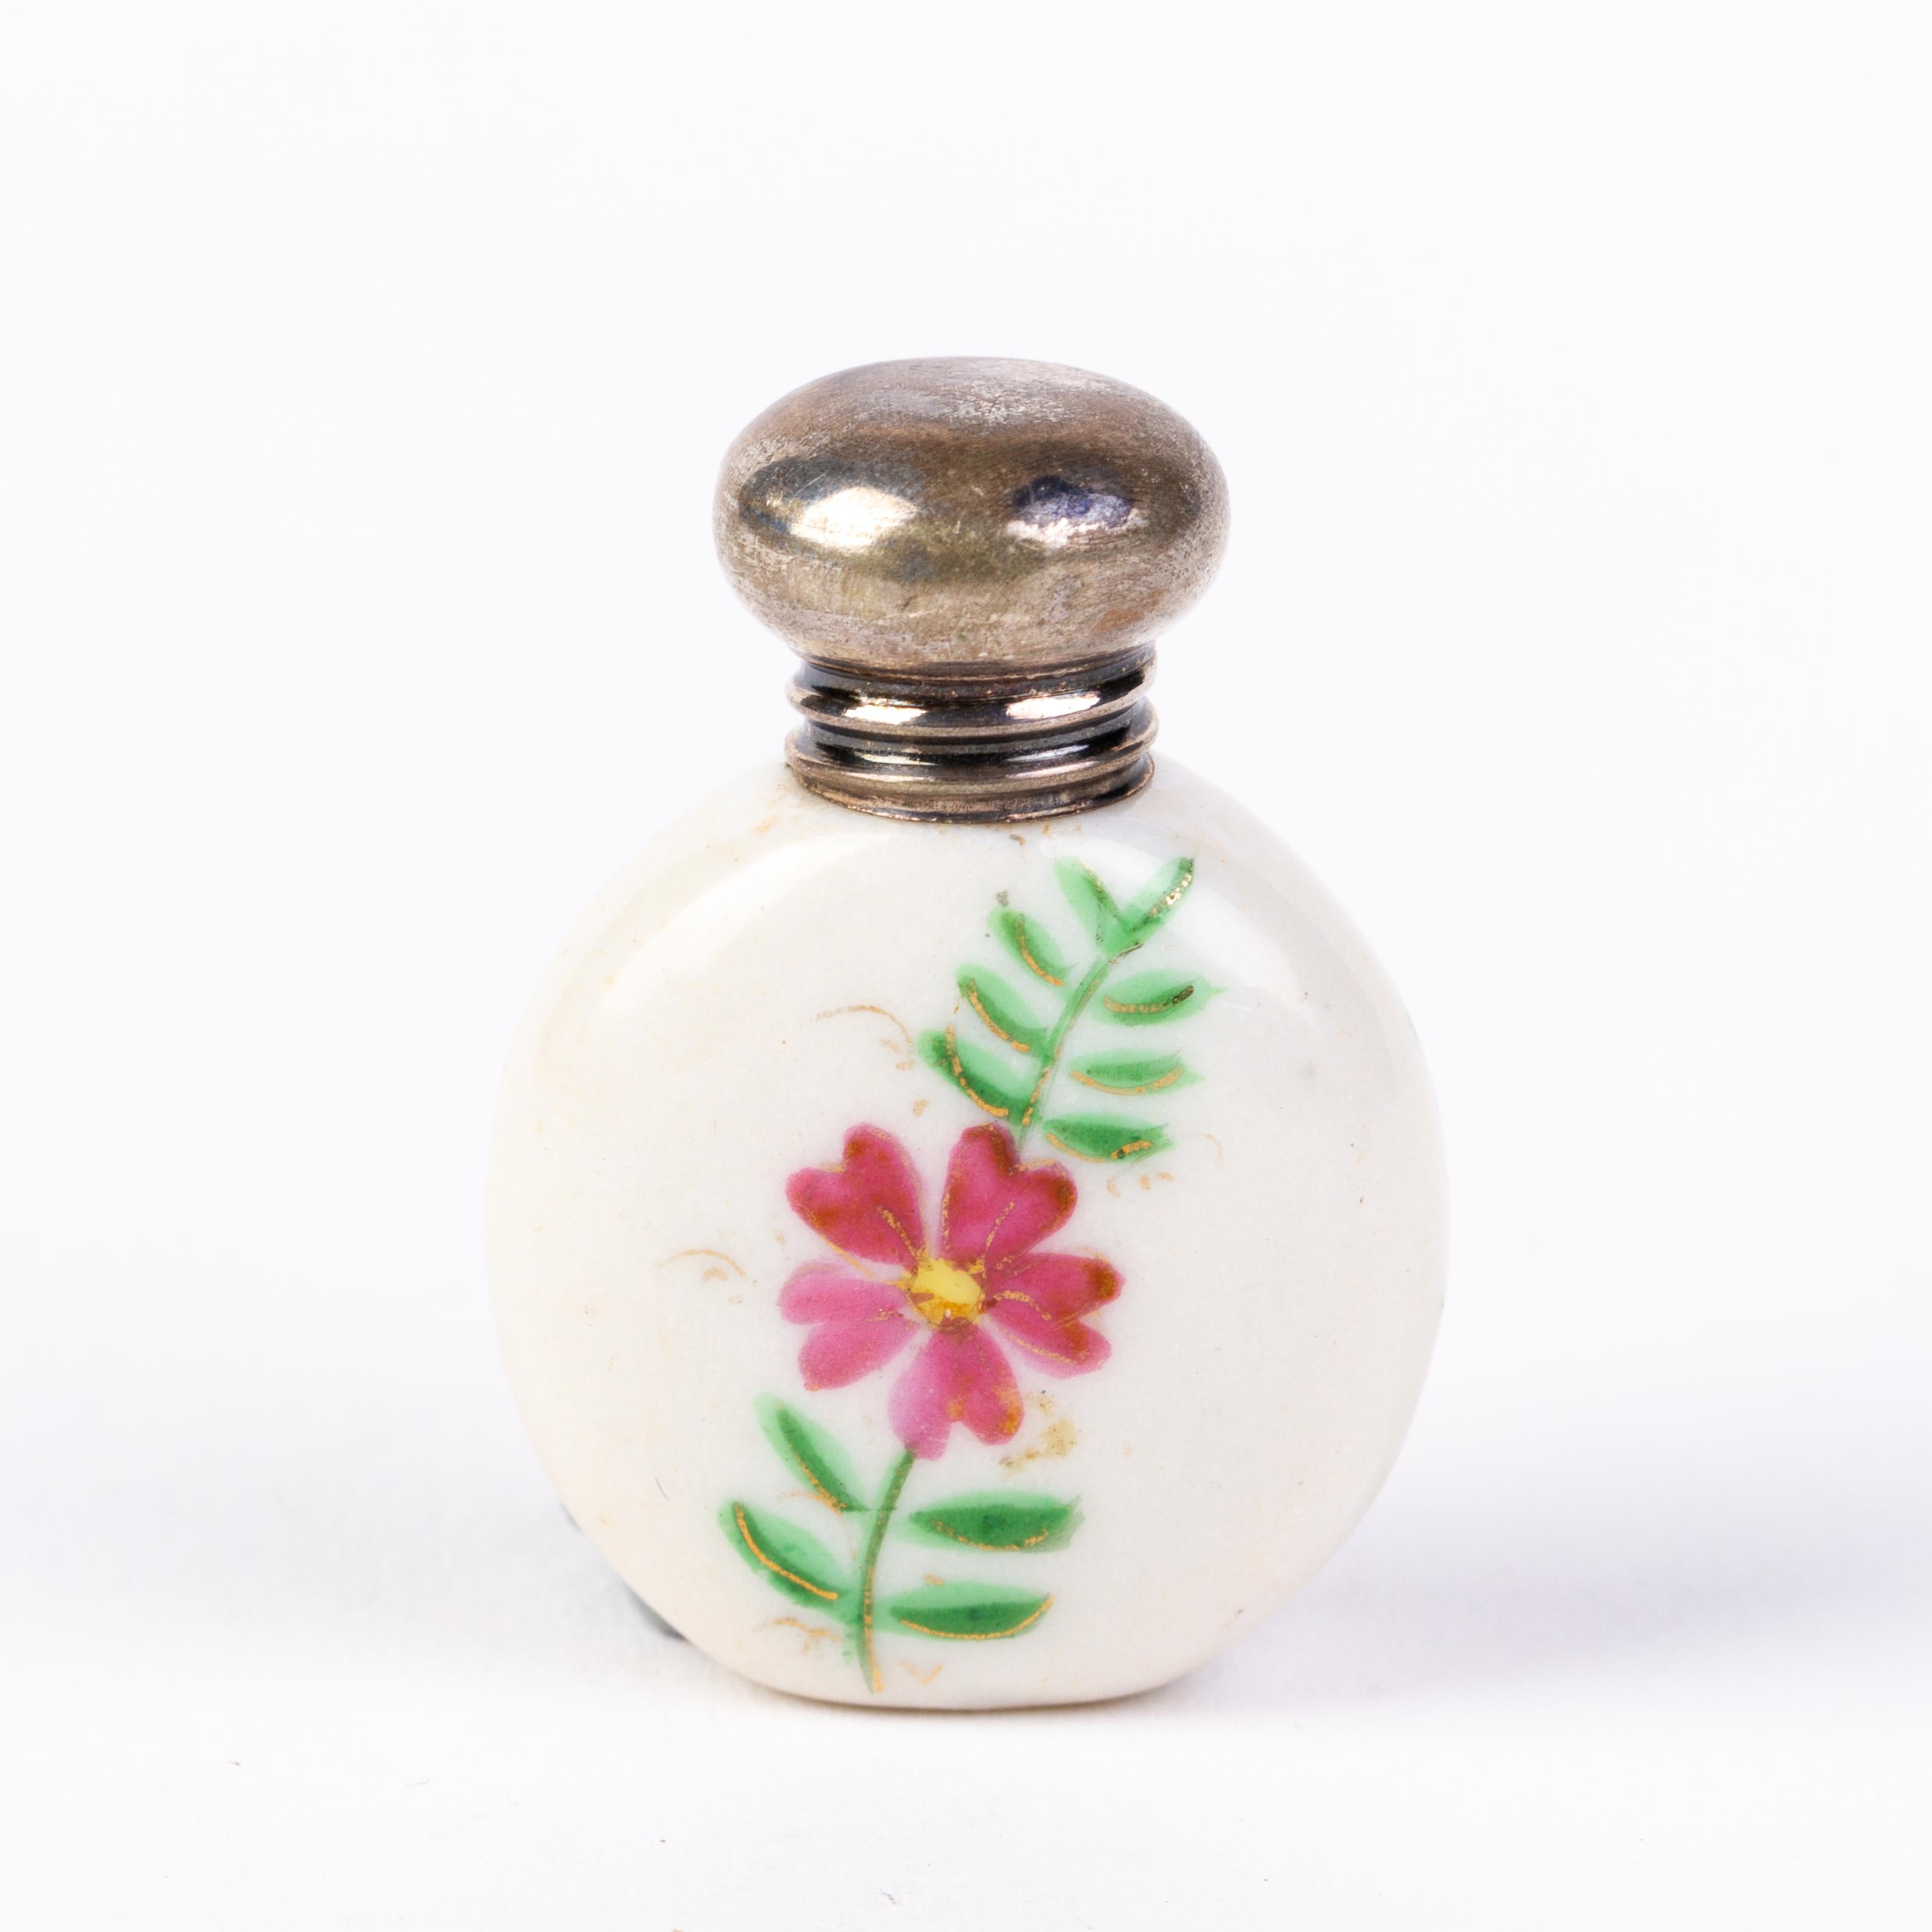 In good condition
From a private collection
Free international shipping
Victorian Hand Painted Porcelain Silver Perfume Bottle 